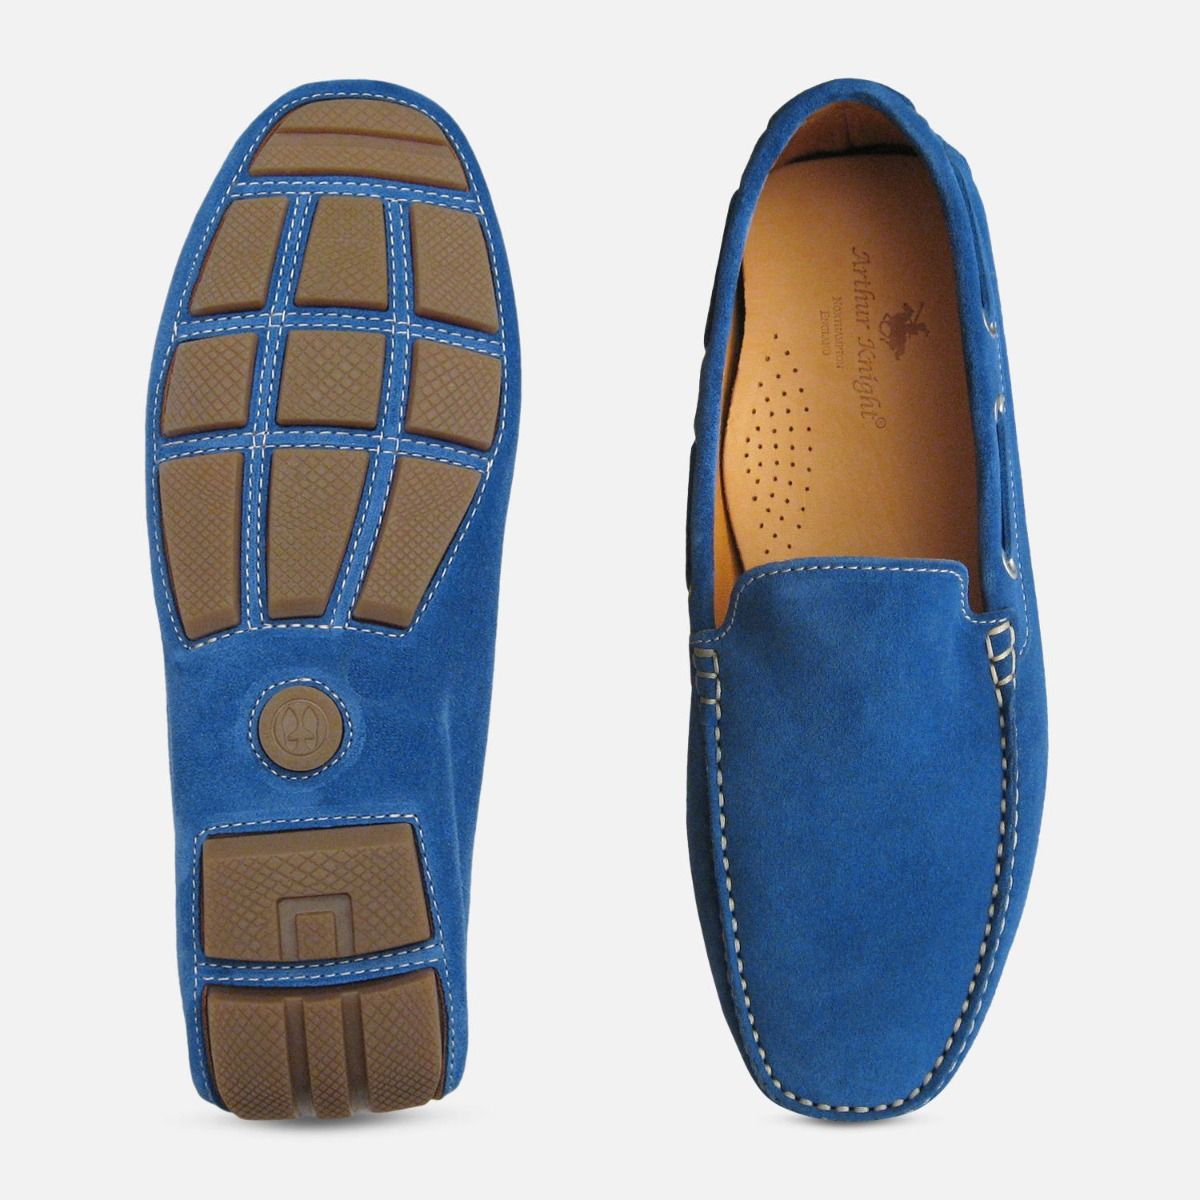 blue driving shoes